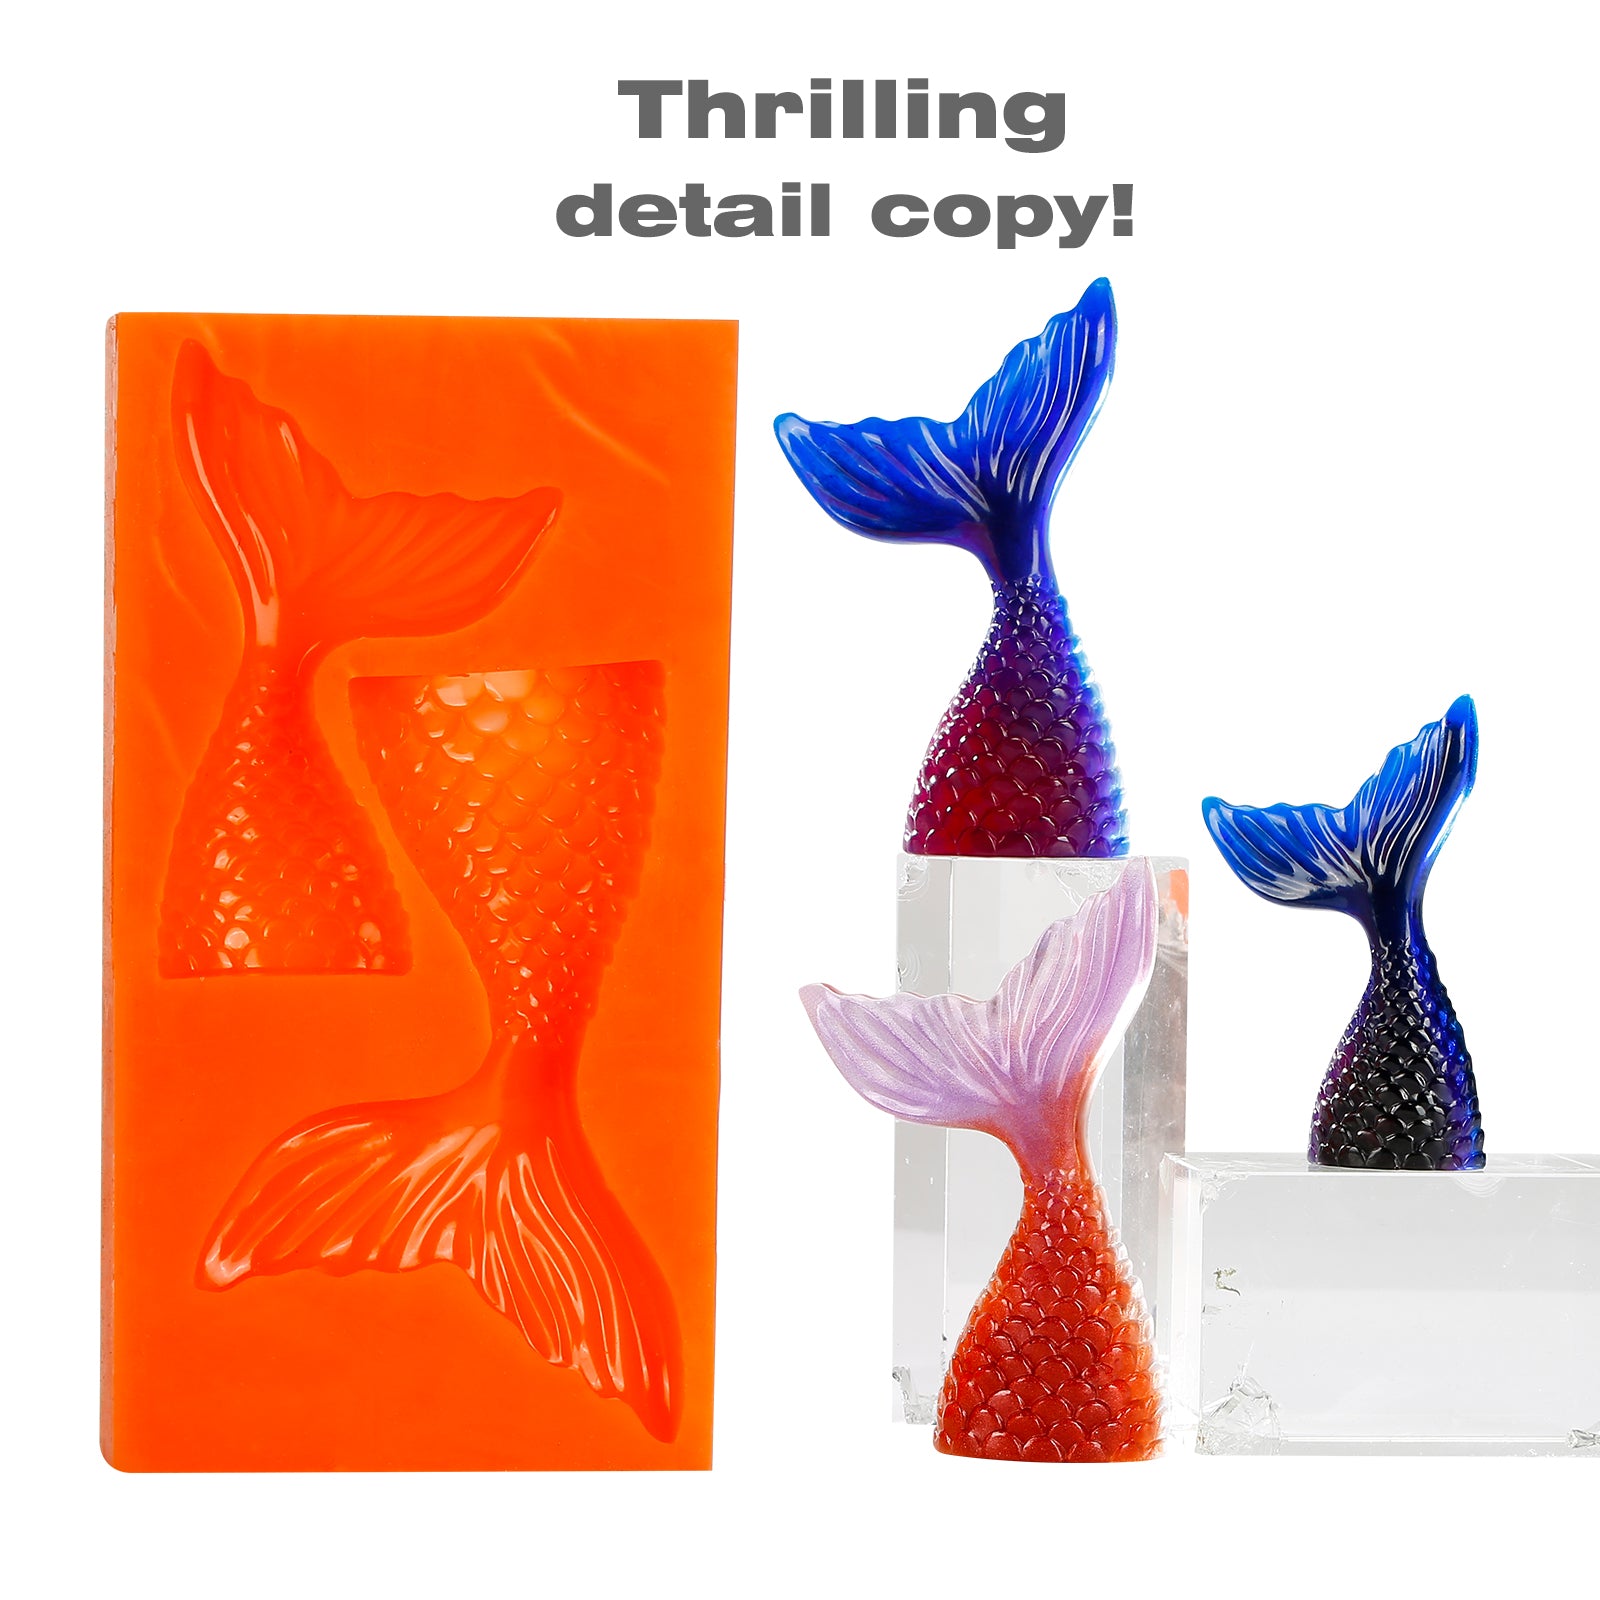 BBDINO Silicone Mold Making Kit, Mold Making Silicone Rubber 30A